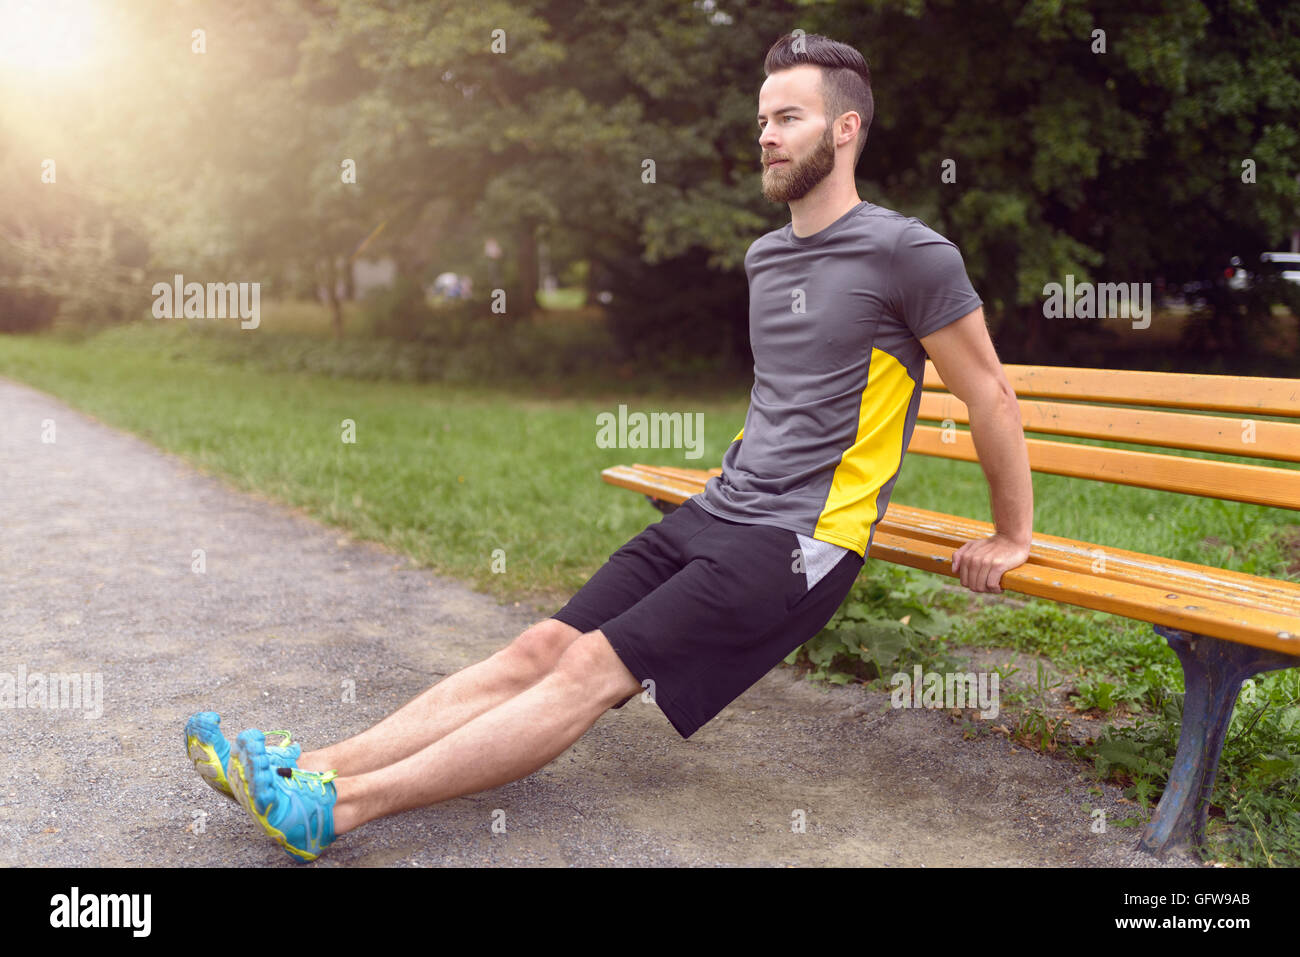 Young man exercising using a wooden park bench raising himself on his arms to tone his muscles, side view with copy space in a h Stock Photo